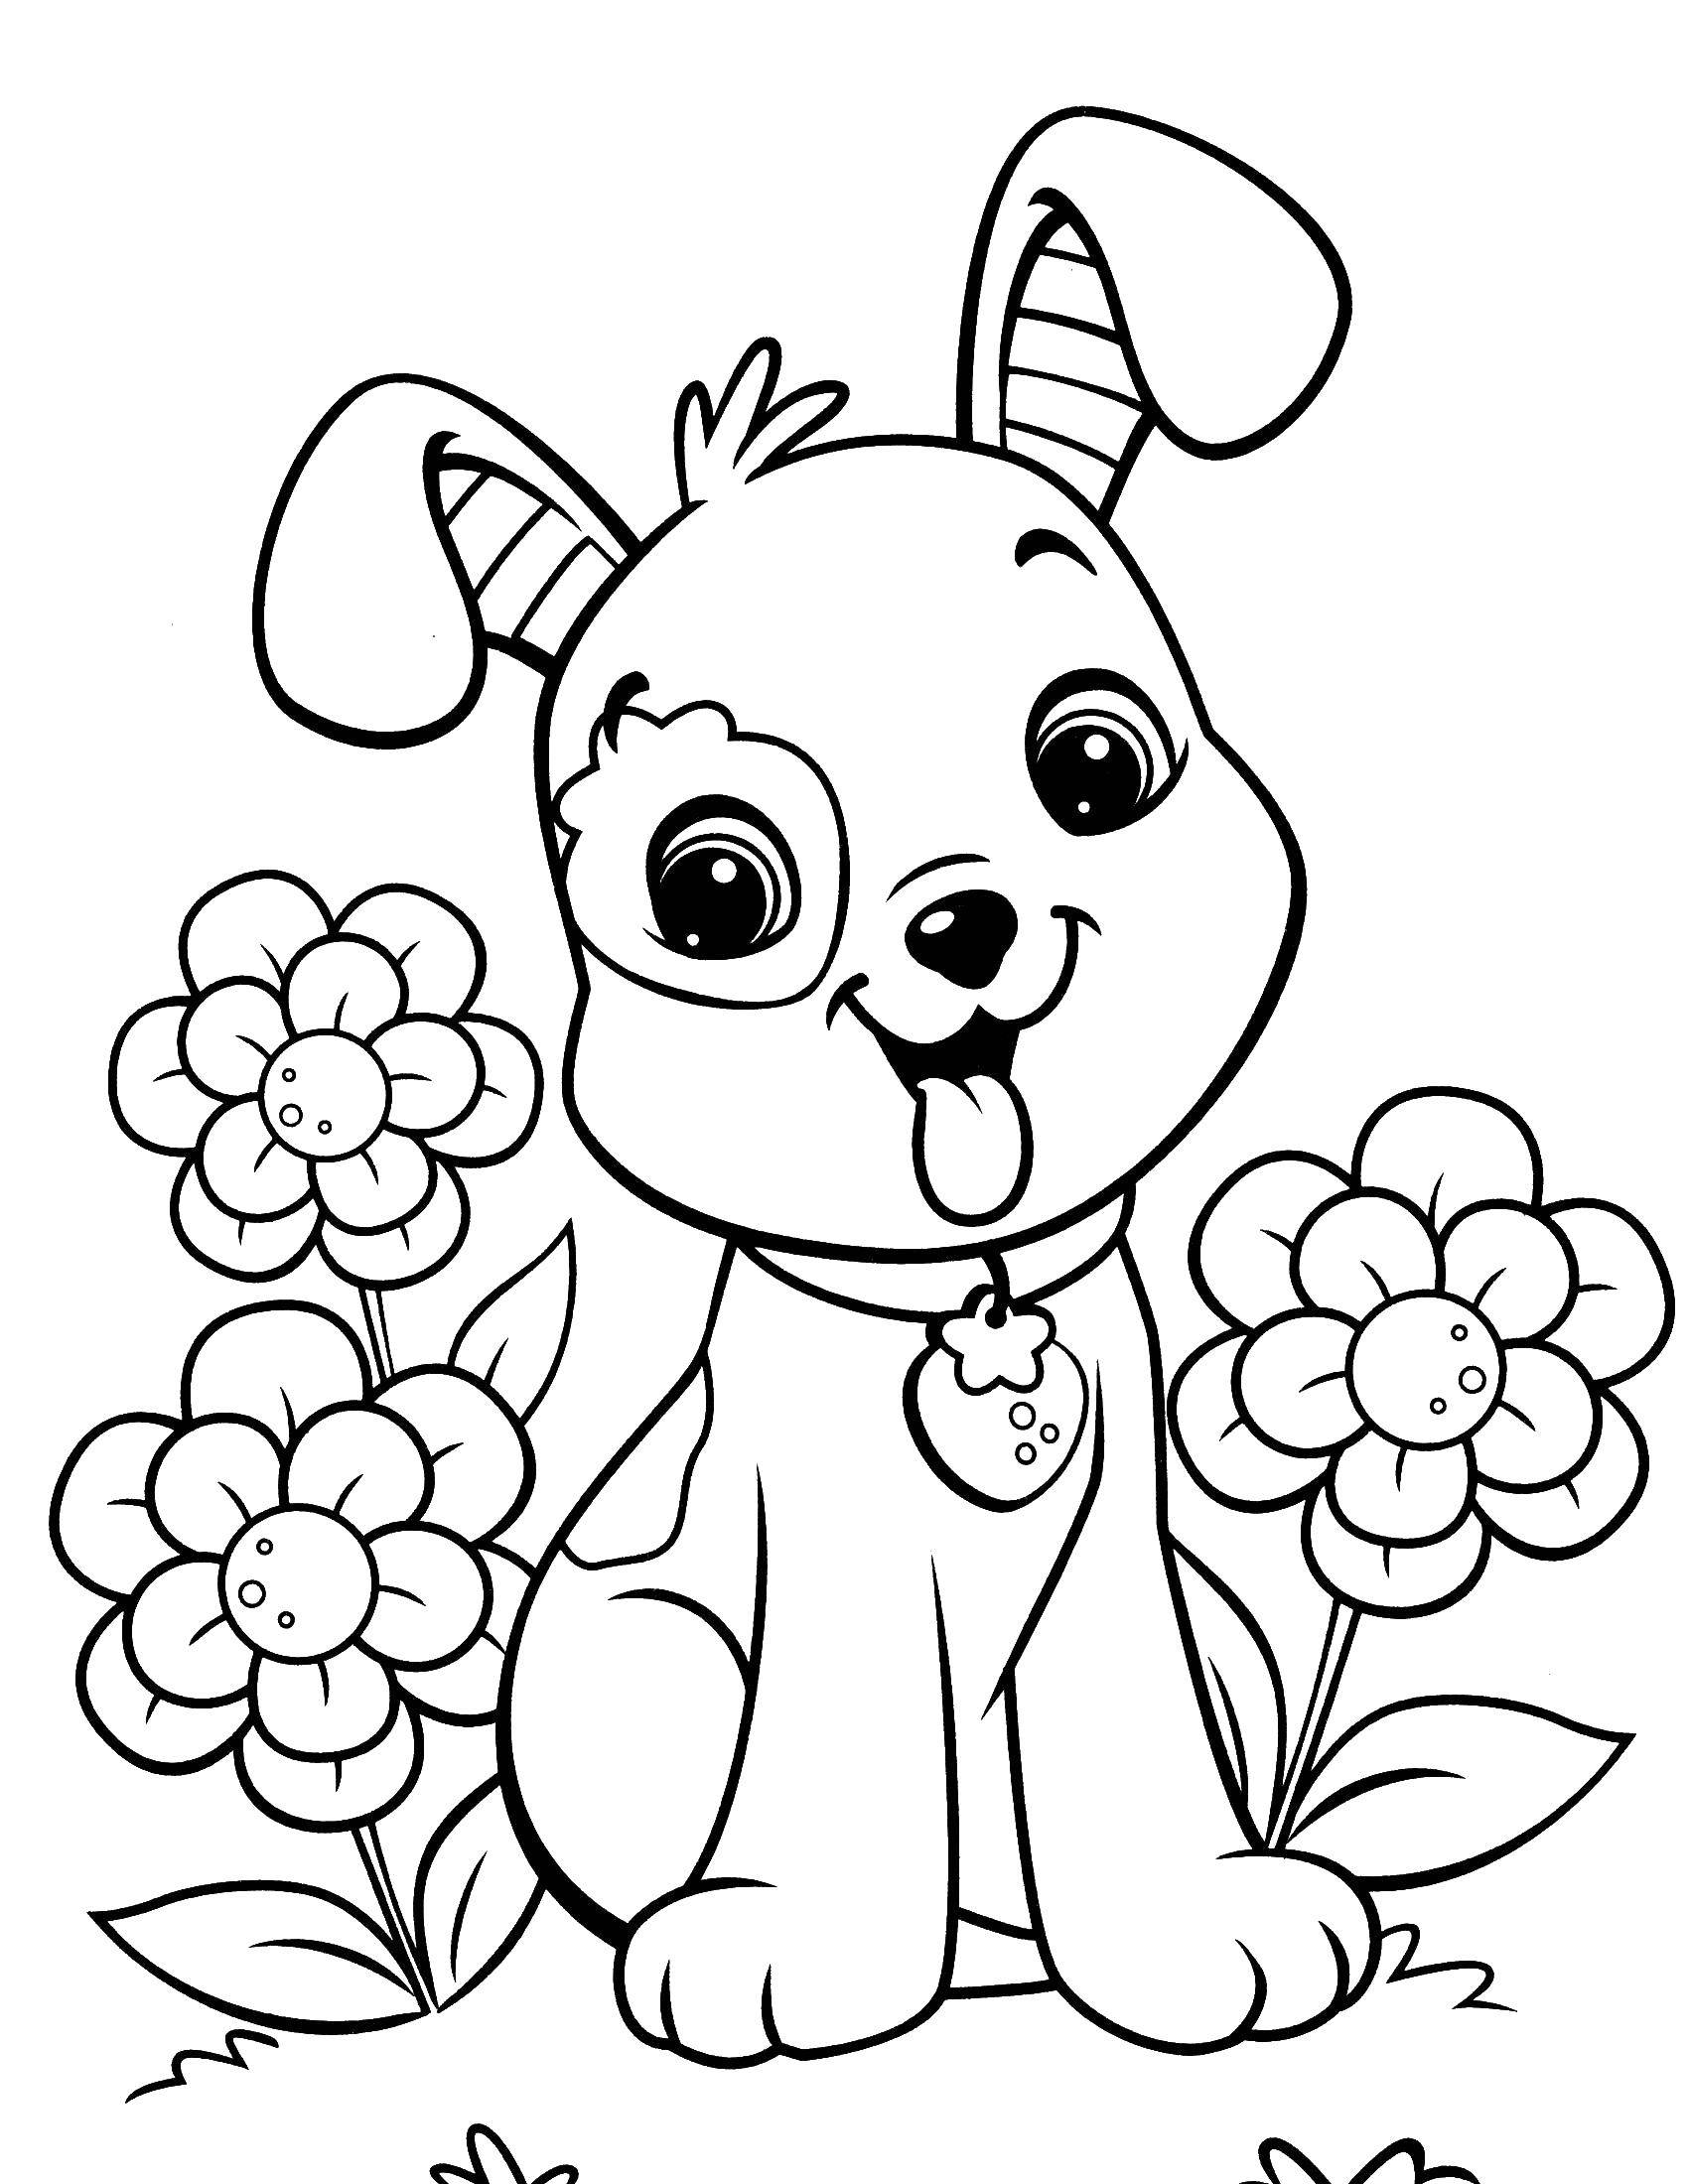 Coloring Funny dog. Category animals. Tags:  the dog.